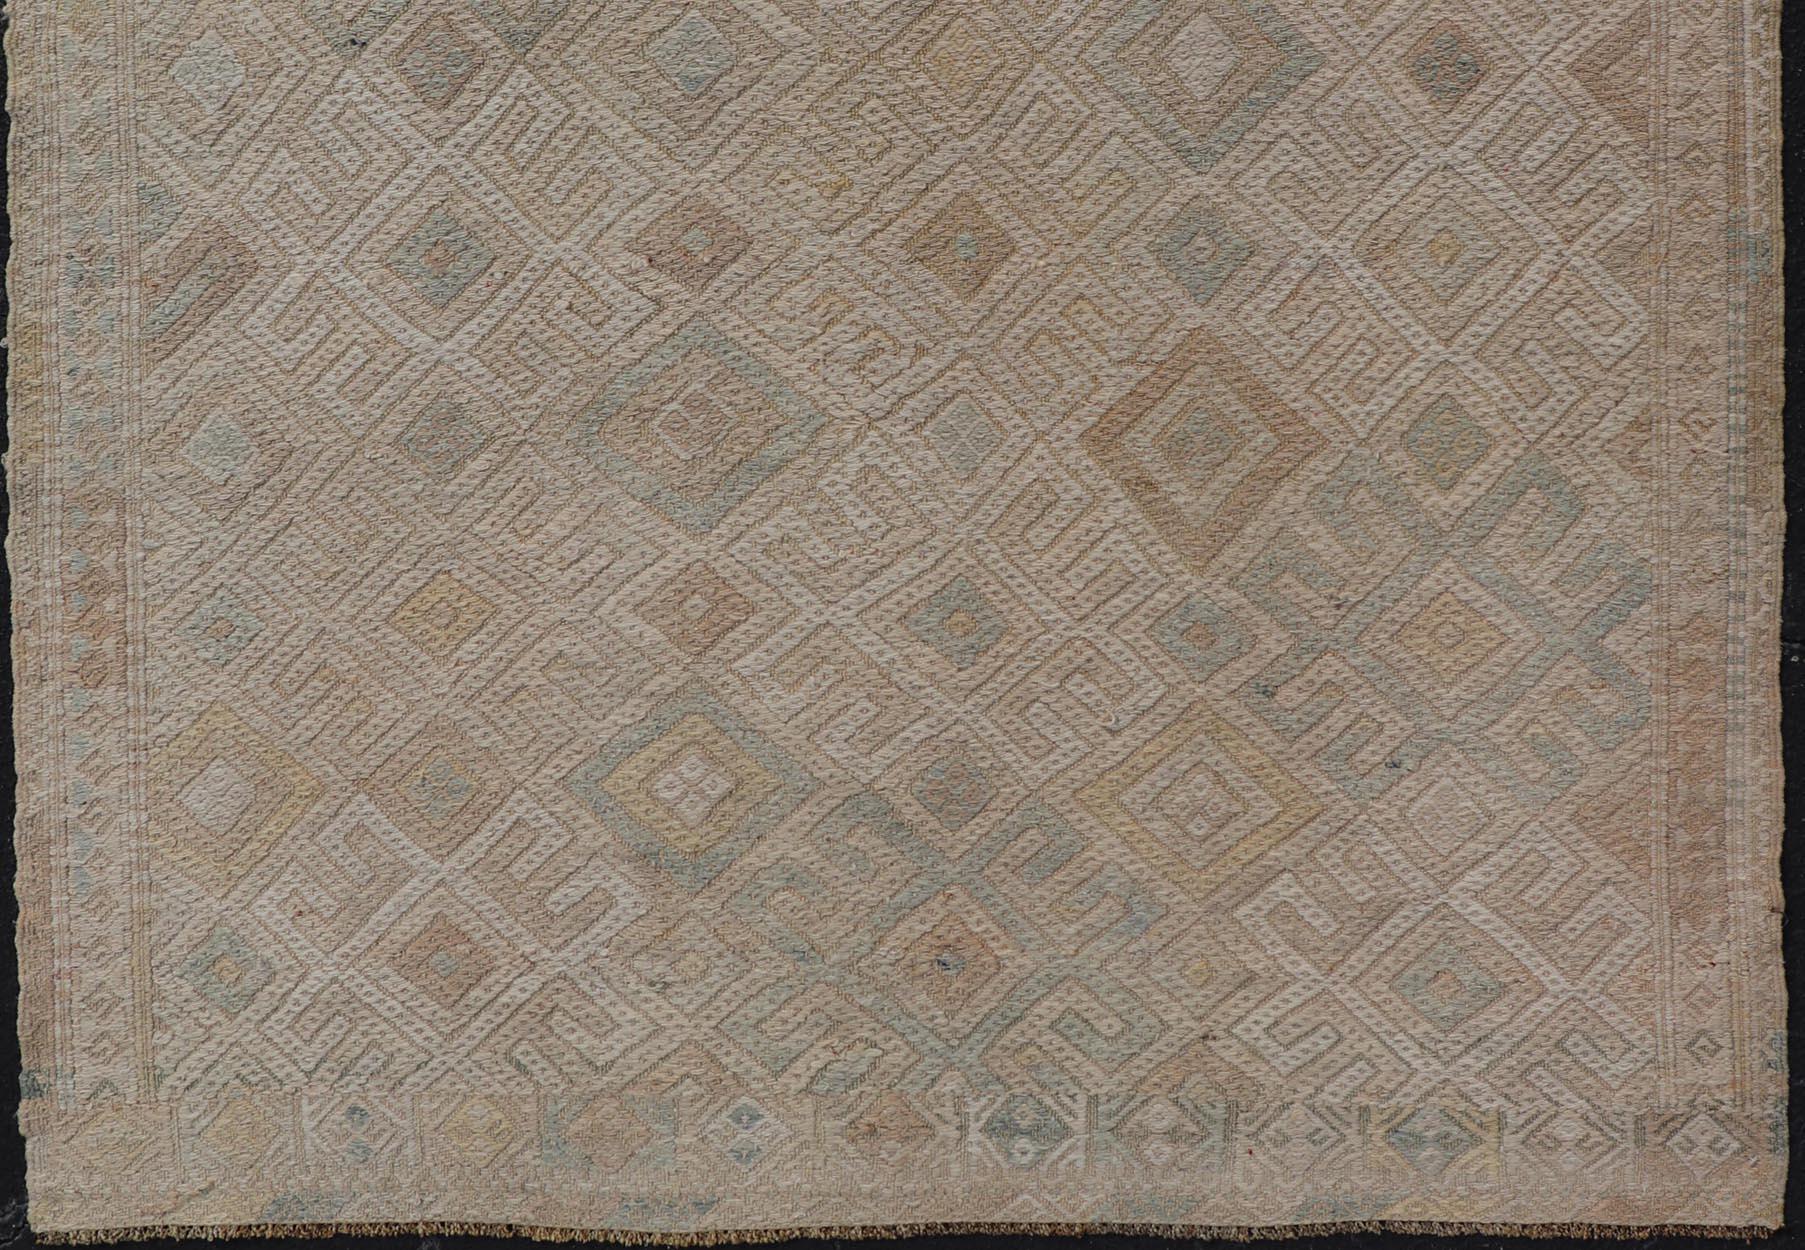 Measures: 5'0 x 6'5

This vintage Turkish Kilim features soft neutral colors and a woven texture. The design is a sub-geometric tribal diamond design in faded light green, tan, taupe, and cream. The border has a repeating tribal design. 

Country of